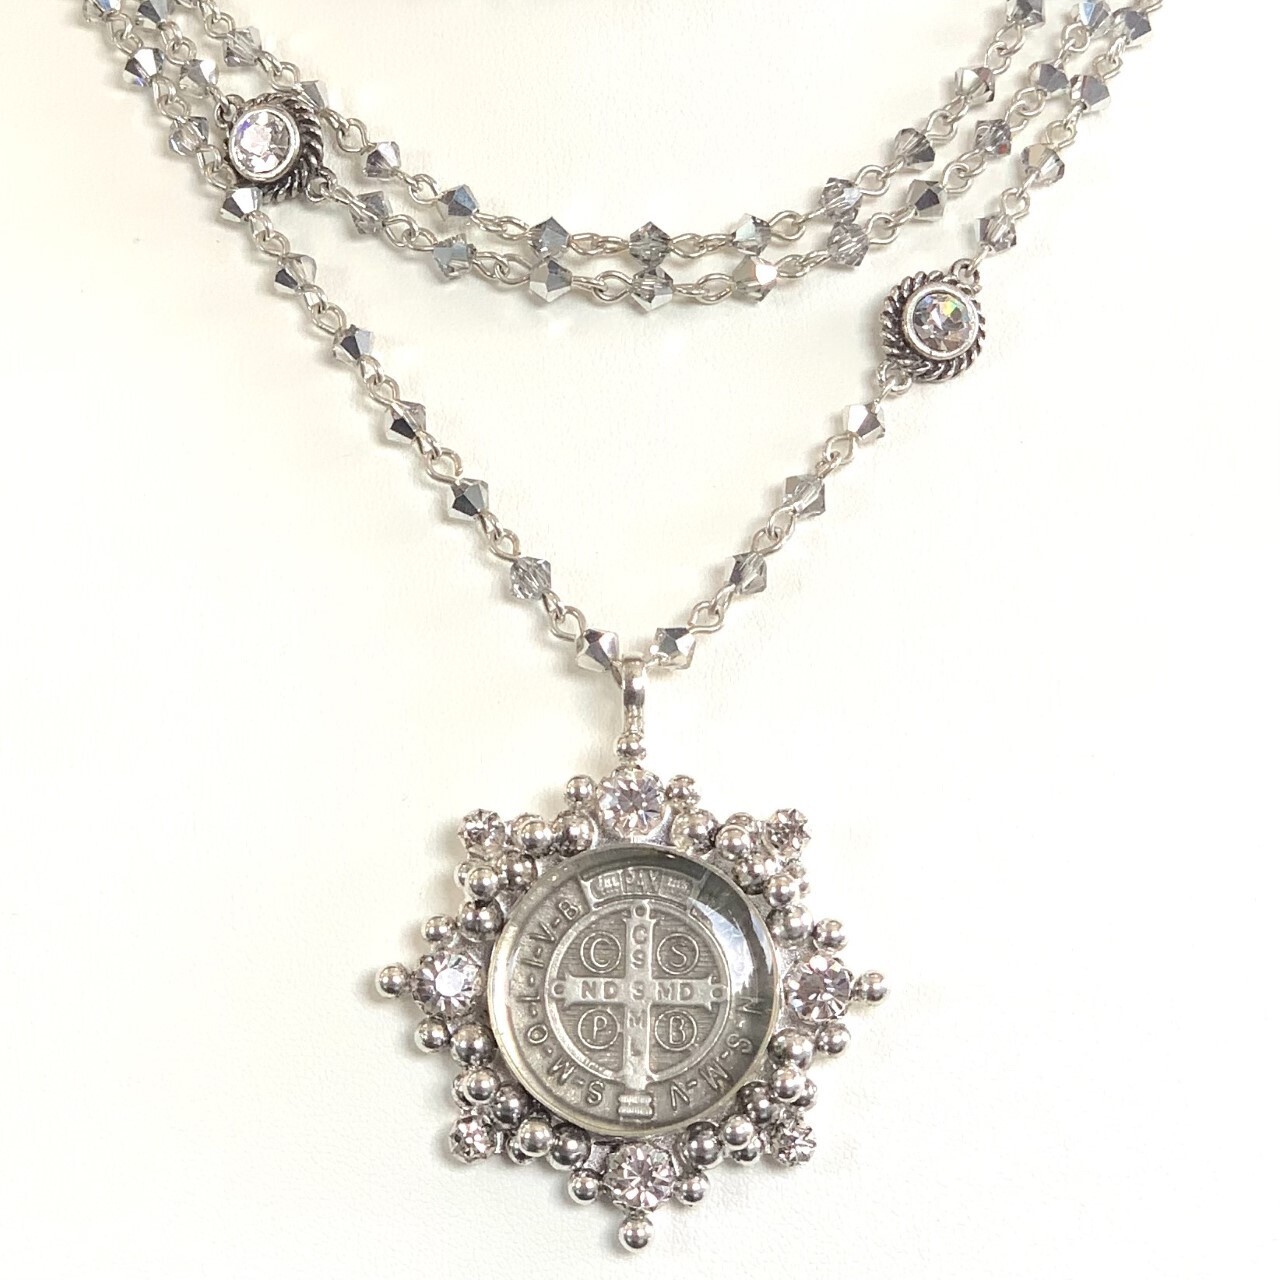 VSA Magdalena Necklace in Light Chrome (Silver)